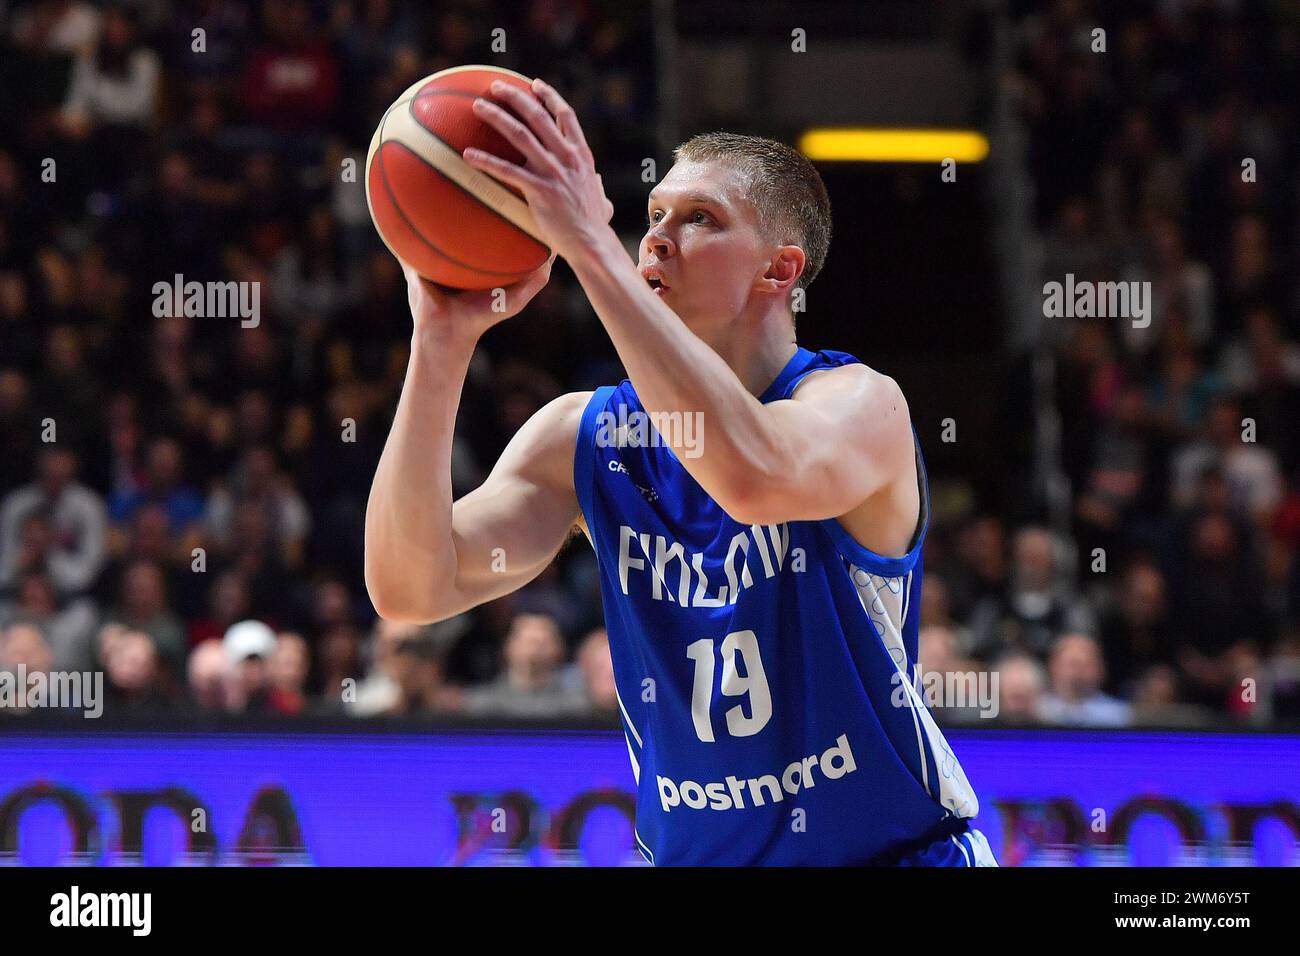 Belgrade, Serbia, 23 February, 2023. Elias Valtonen of Finland shoots for three points during the EuroBasket 2025 Qualifiers match between Serbia and Finland at Aleksandar Nikolic in Belgrade, Serbia. February 23, 2023. Credit: Nikola Krstic/Alamy Stock Photo